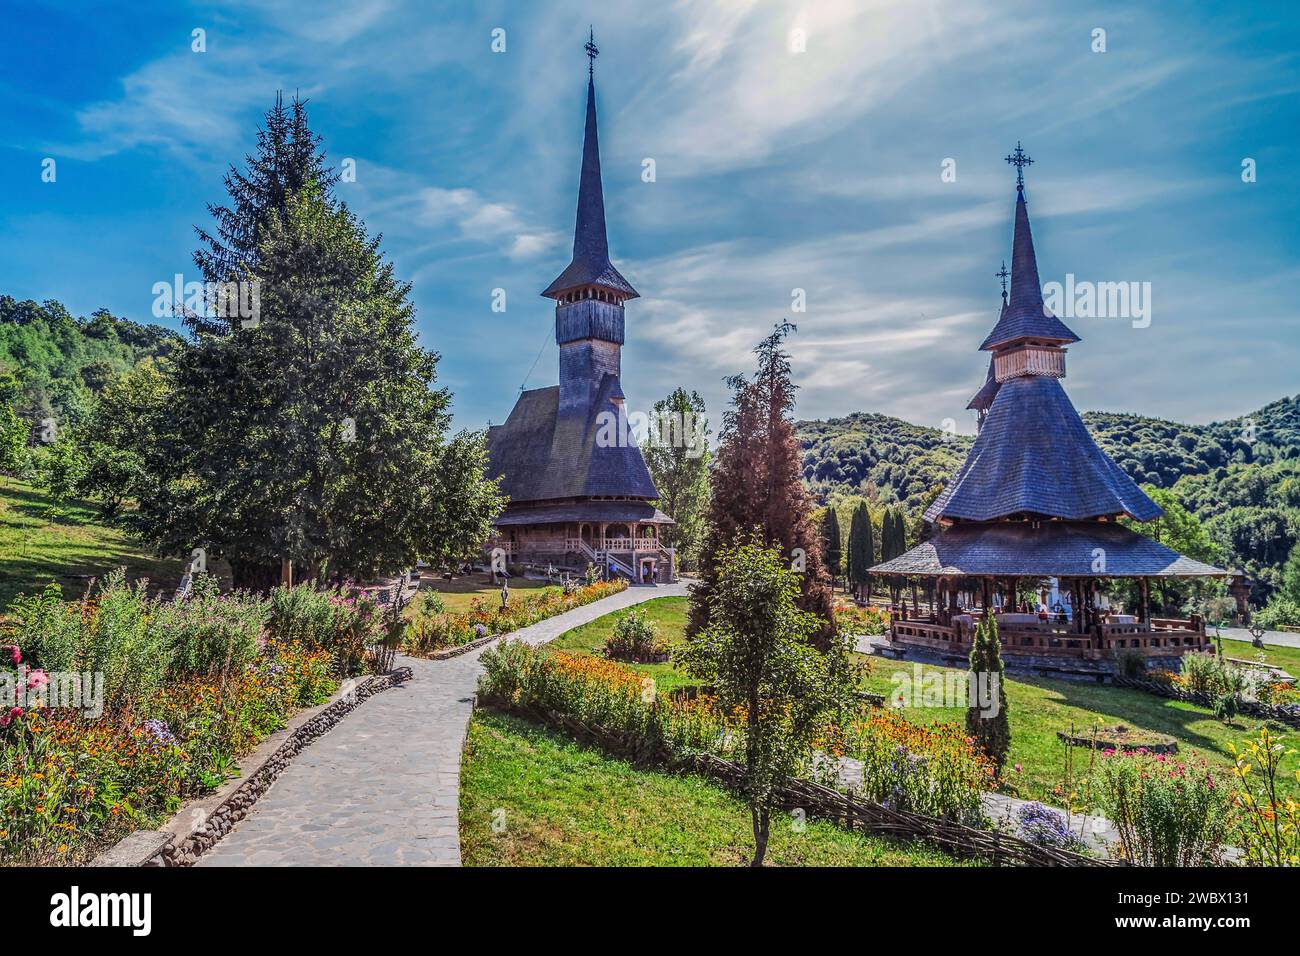 Buildings in the Barsana monastic complex, Maramures, Romania. The first wooden church was built in 1711. Stock Photo